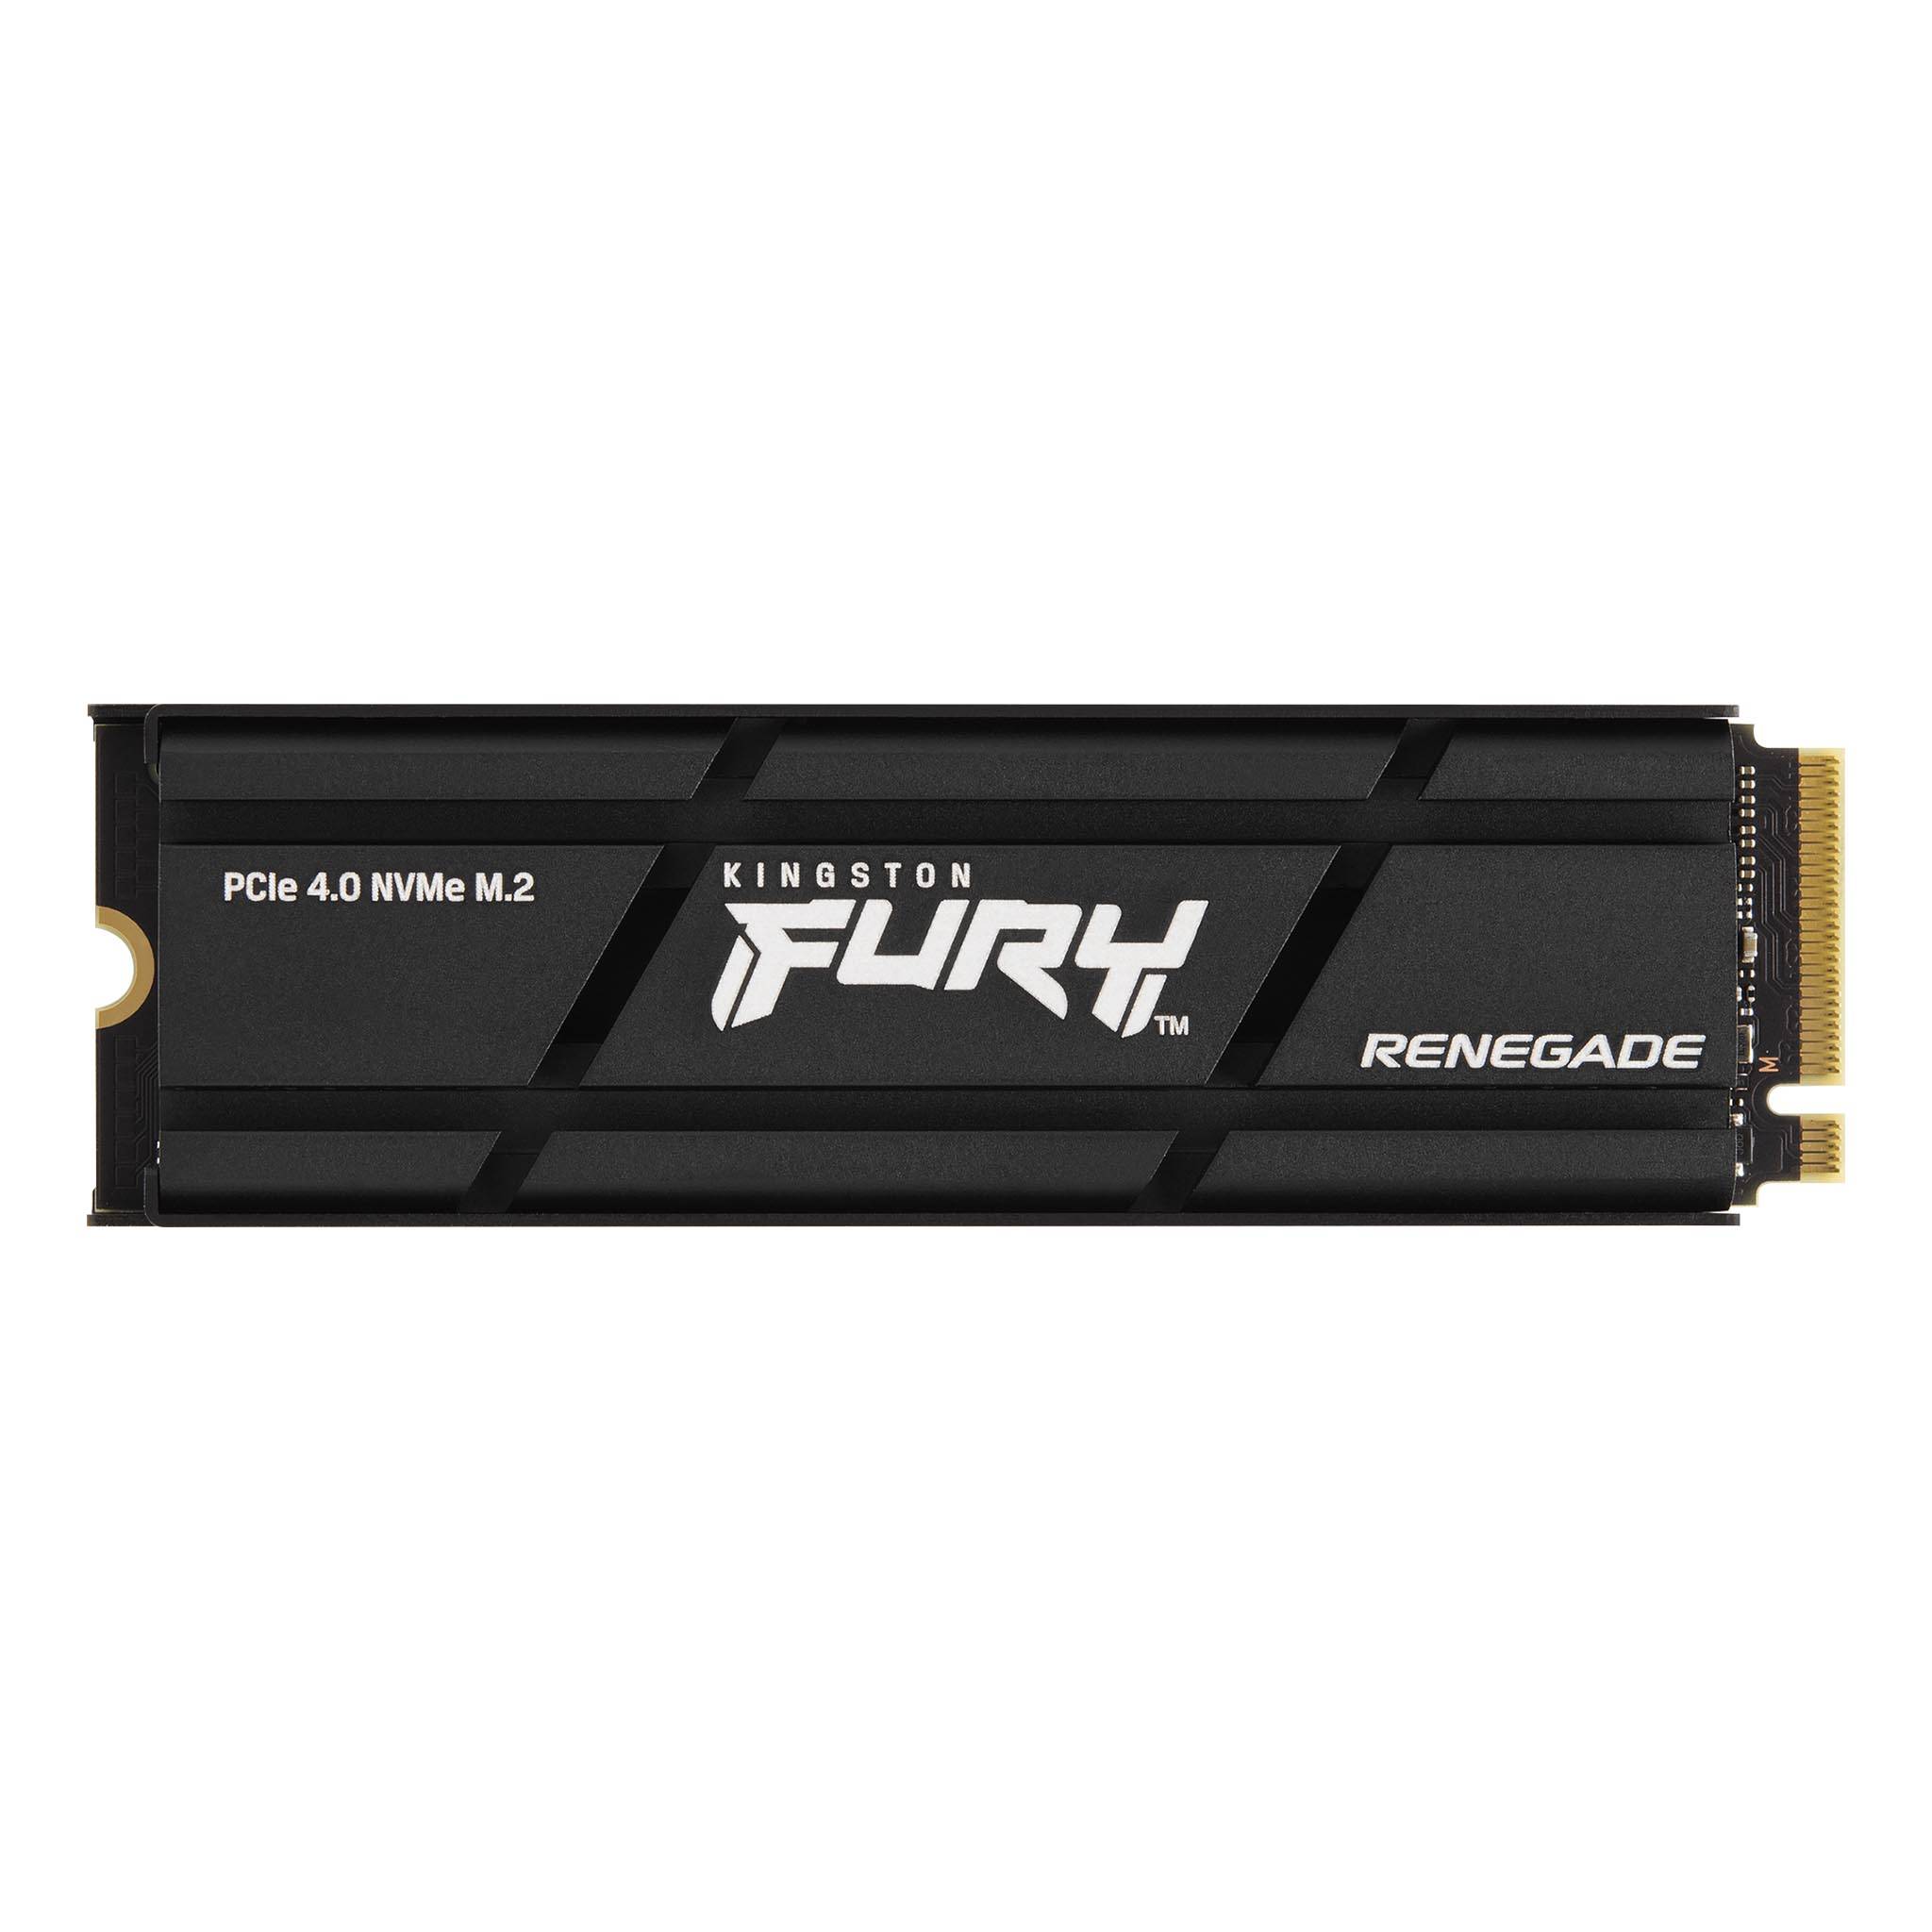 Kingston FURY Renegade 1TB PCIe 4.0 NVMe M.2 SSD FOR PC / PS5 WITH Heatsink